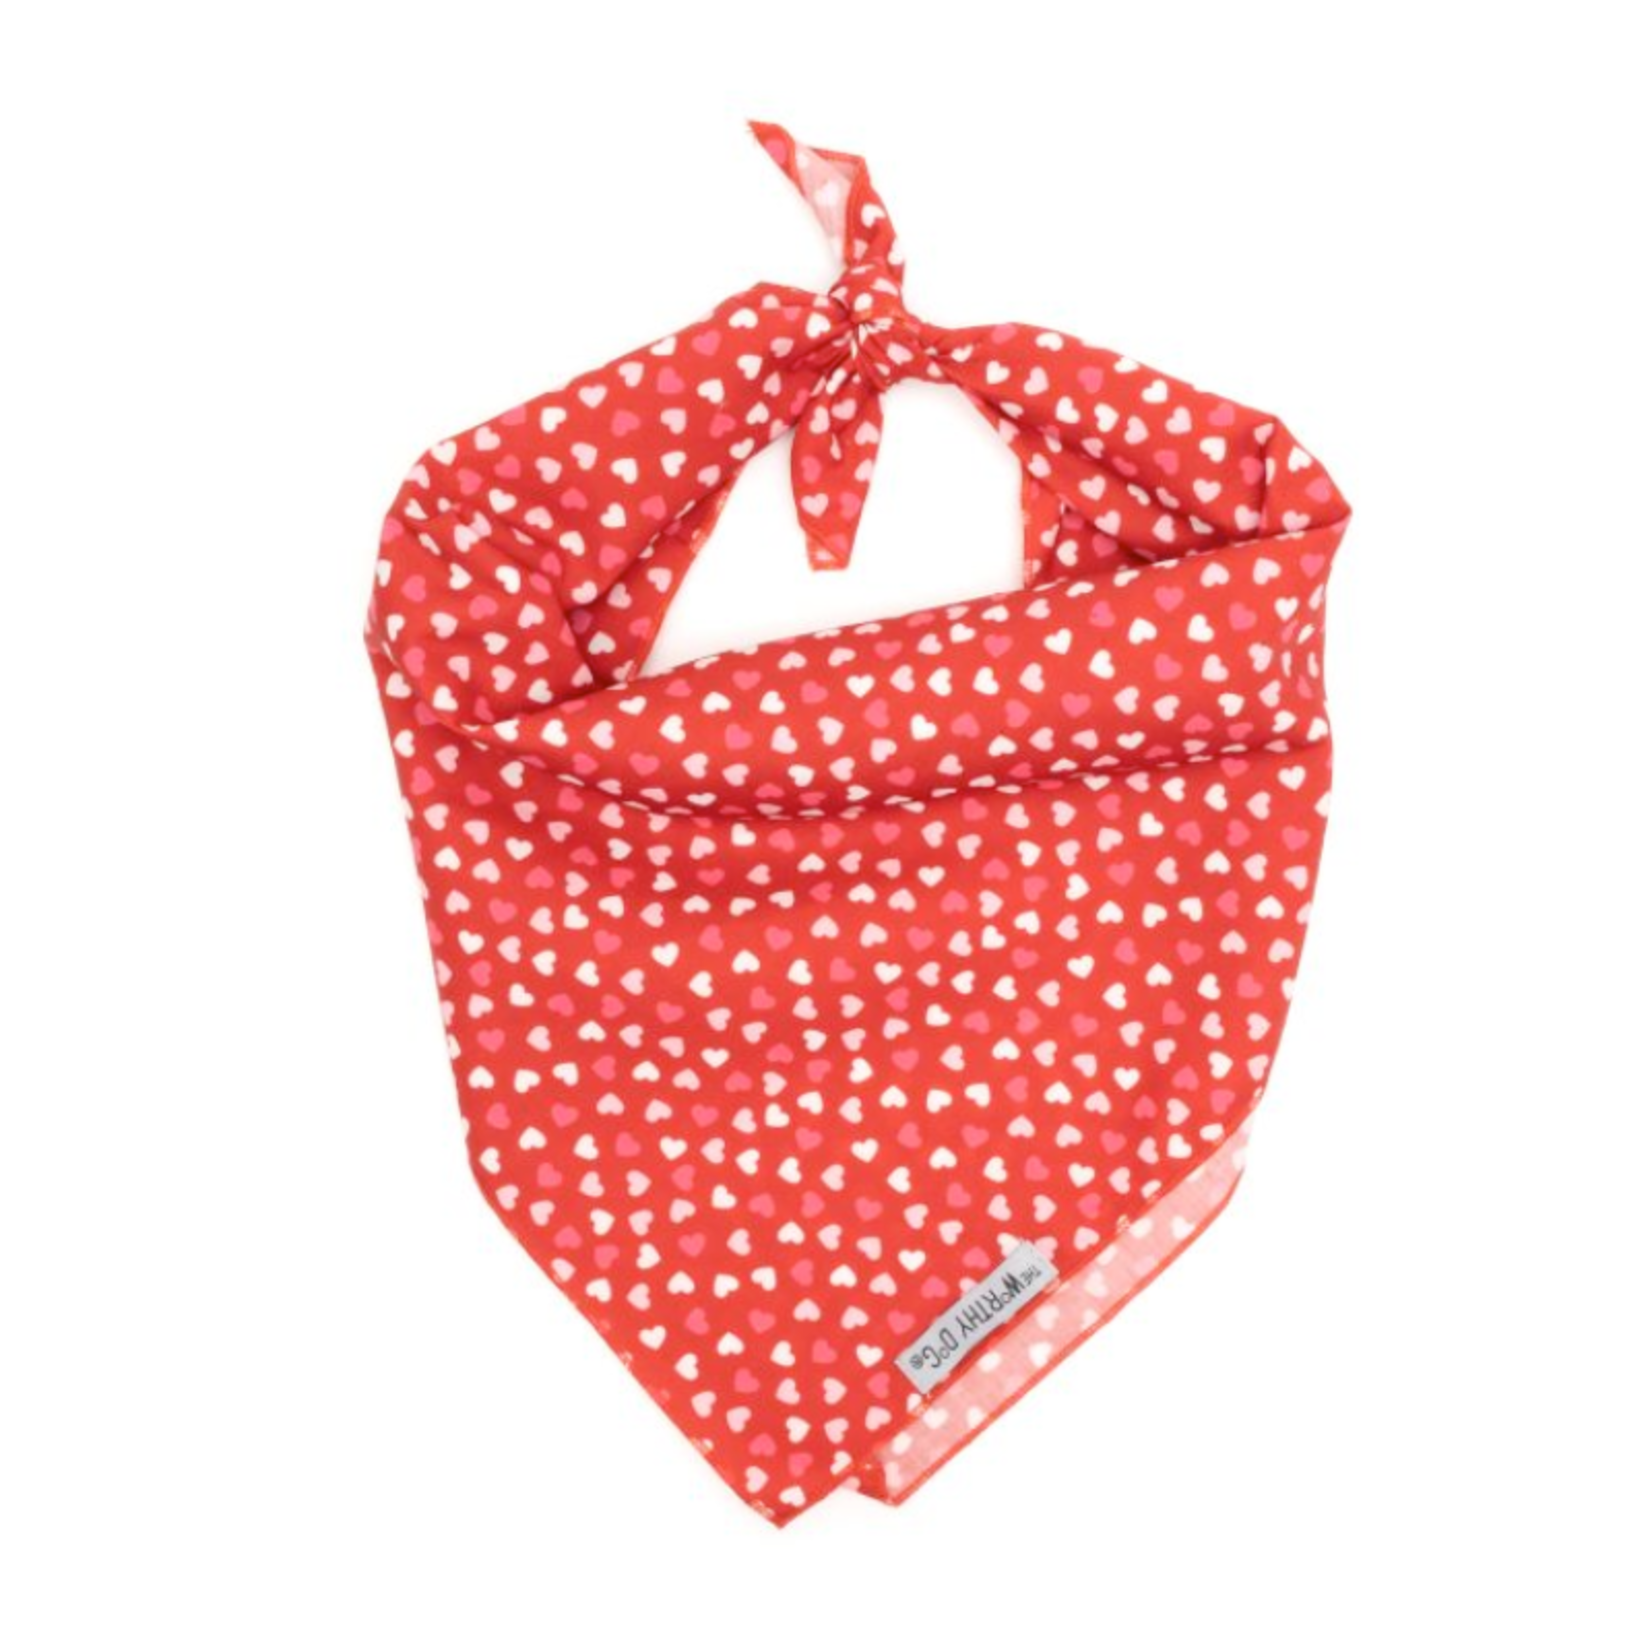 The Worthy Dog Cupid (Red with White & Pink Hearts) - Bandana - The Worthy Dog